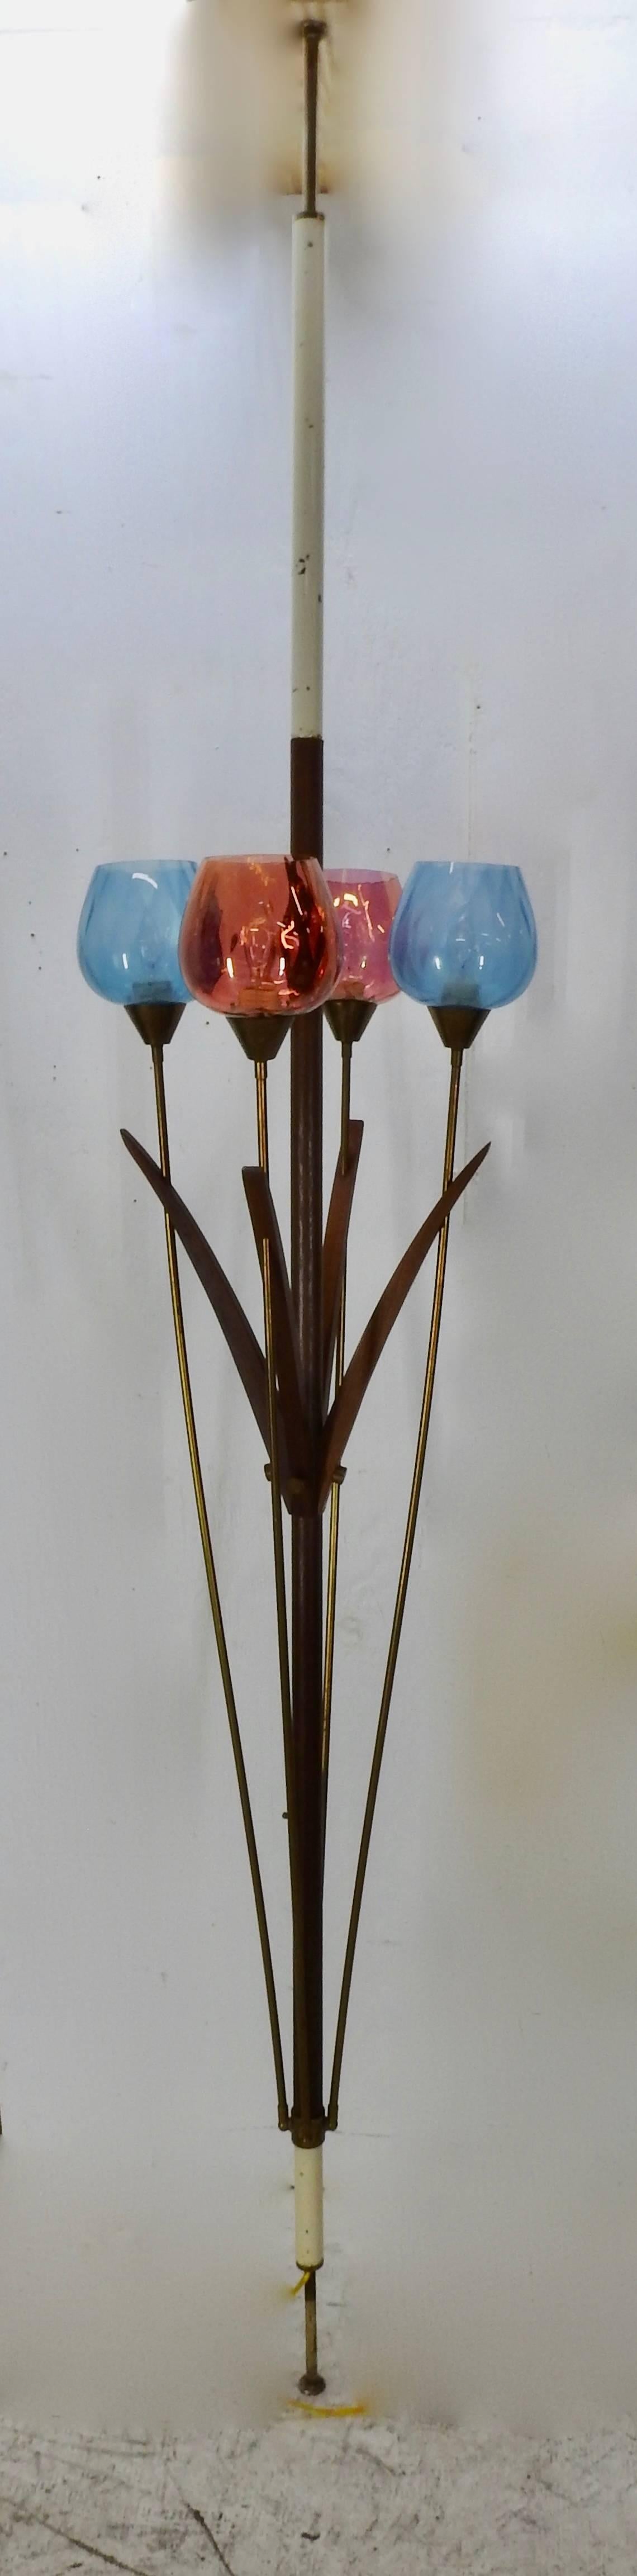 We are featuring an Italian Mid-Century Modern tension floor lamp with four lights. The stained glass shades are cranberry and turquoise. The lamp has porcelain Leviton sockets and works with more bulbs lighting with each turn of the knob. The cord